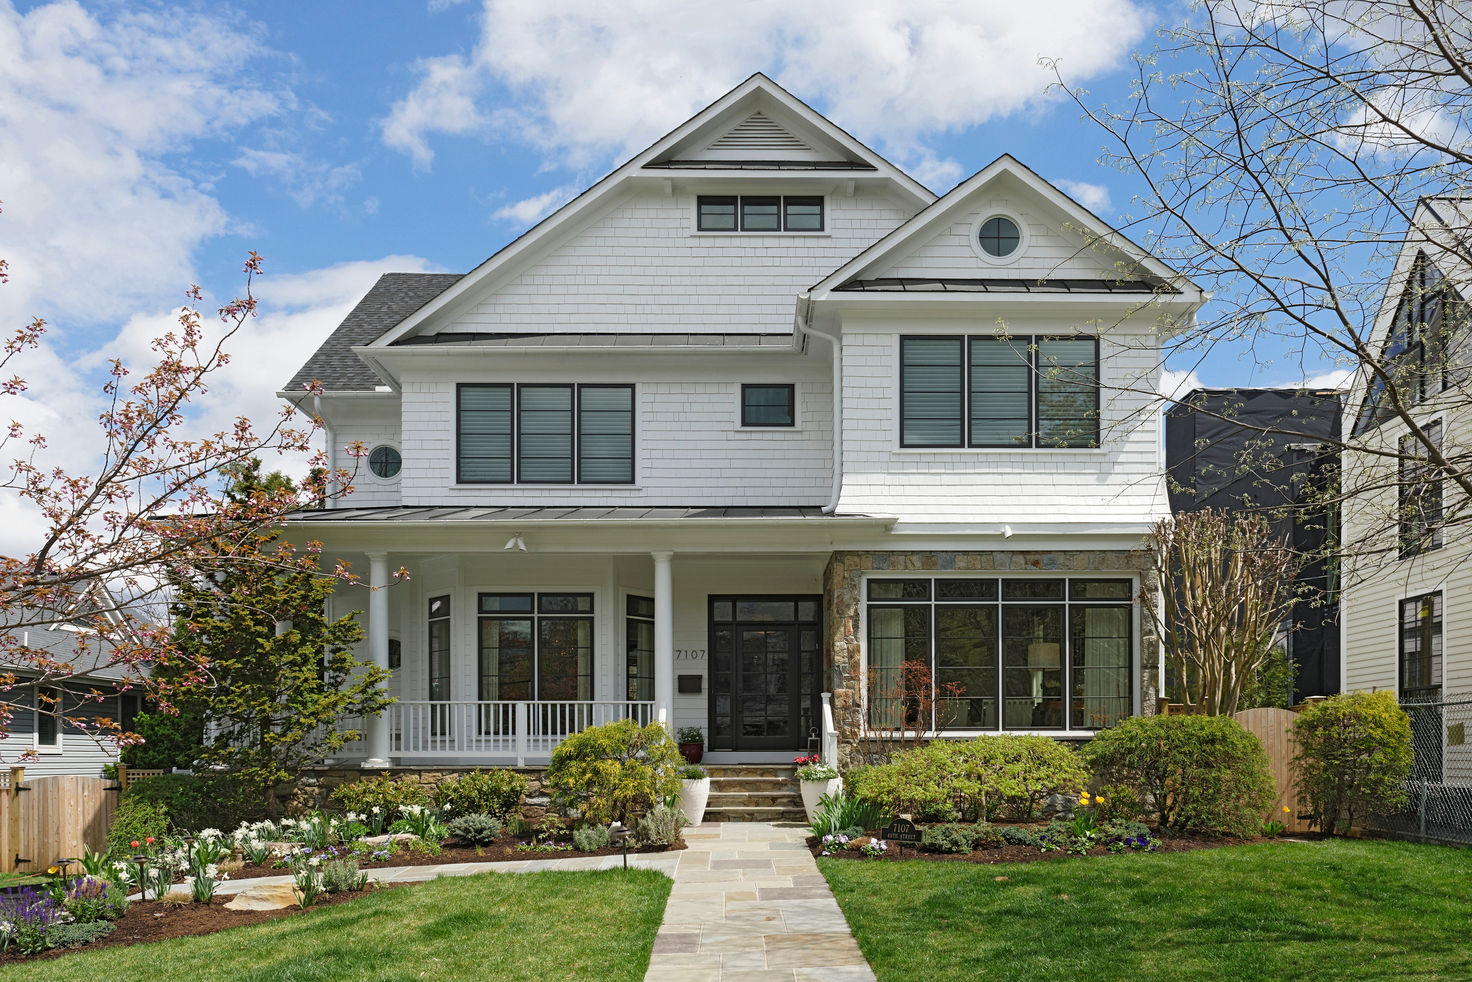 Fire Restoration in Chevy Chase Creates Opportunity for Whole House Renovation, BOWA - Design Build Experts BOWA - Design Build Experts Casas unifamilares